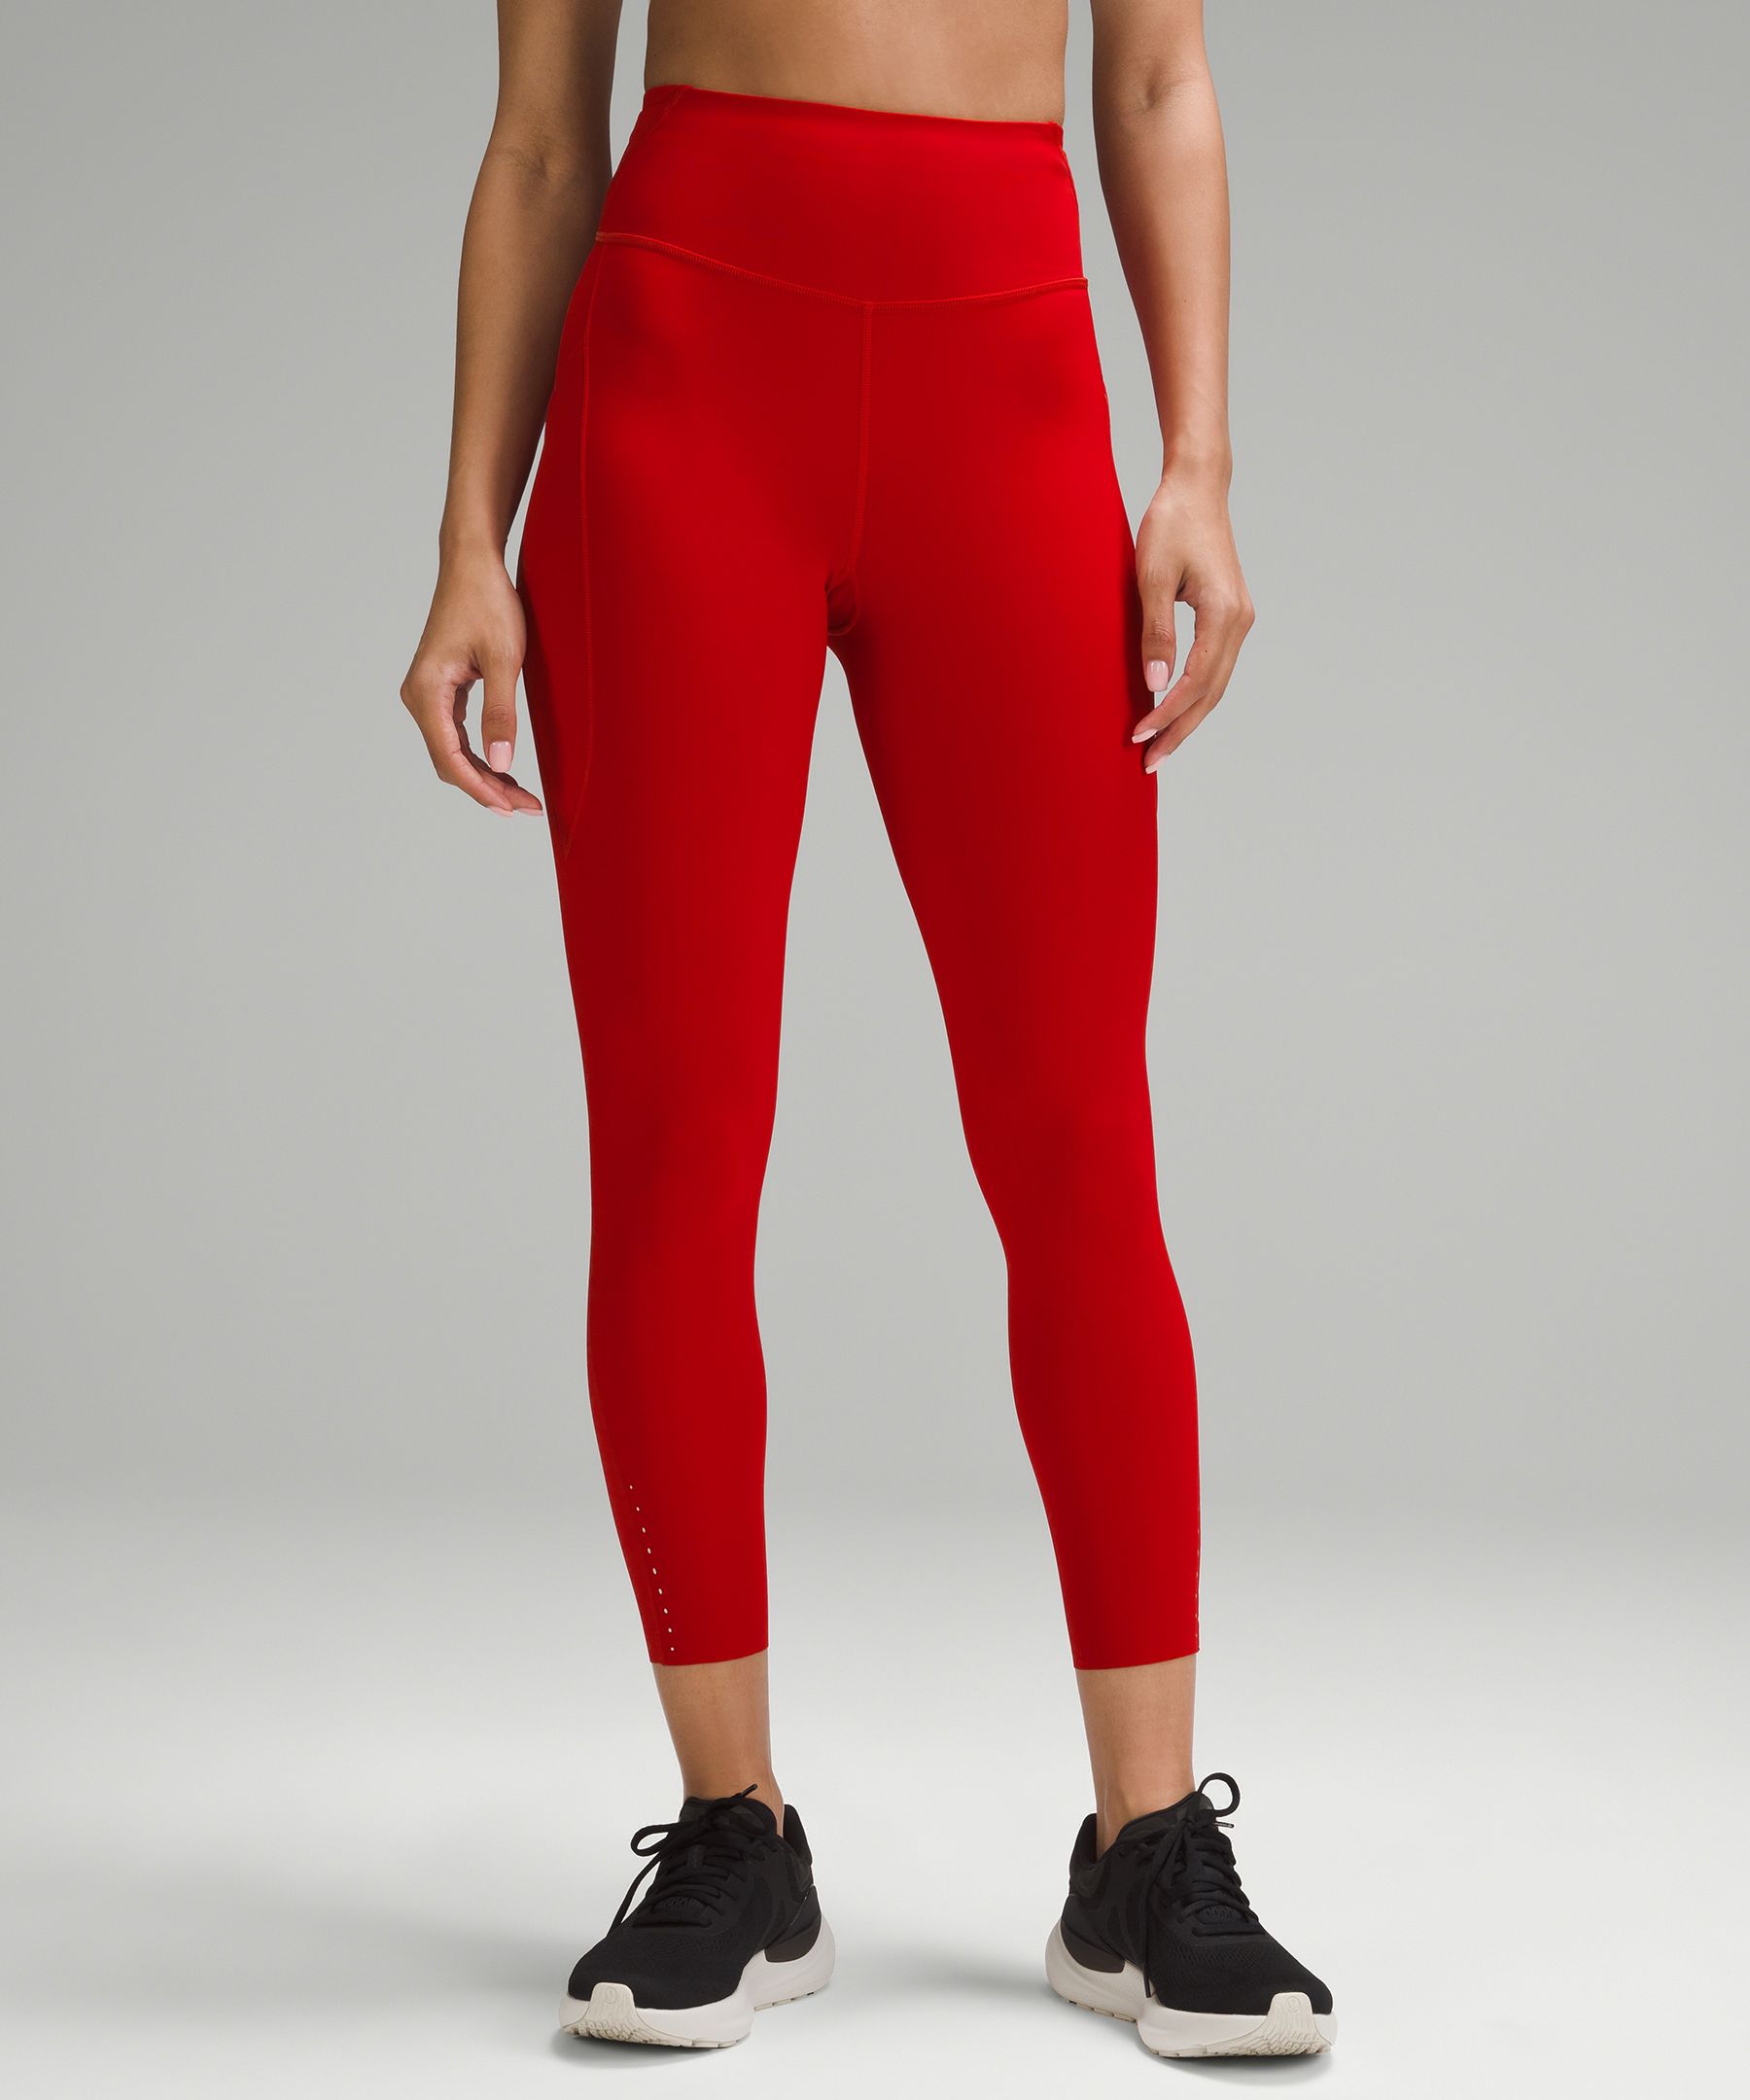 Fast and Free Tight II 25 *Non-Reflective Nulux, Women's Running Tights, lululemon athletica